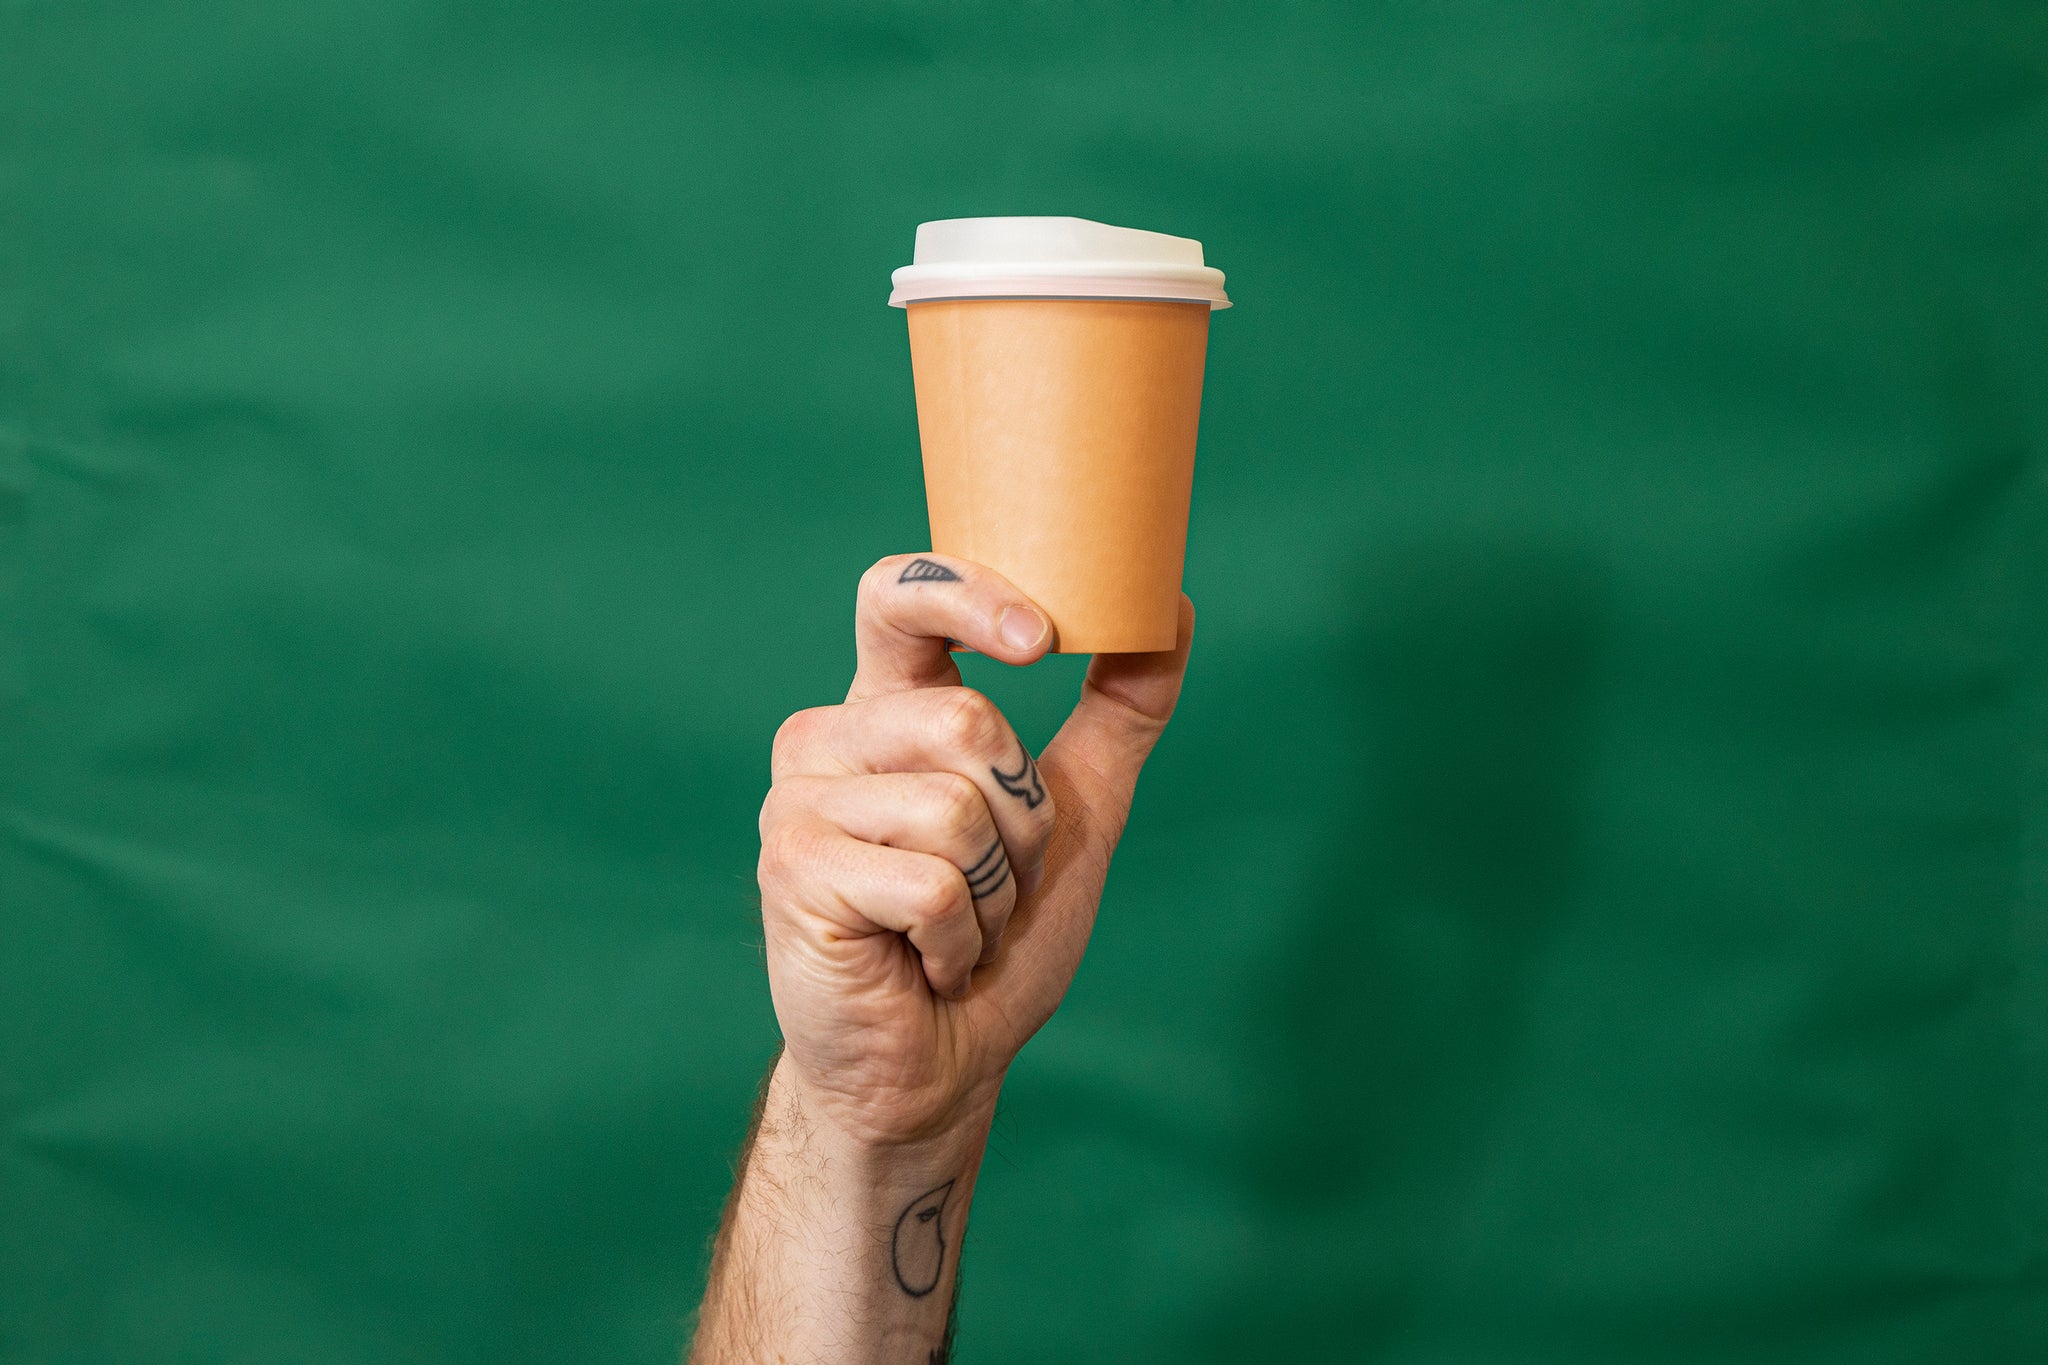 Tattooed hand holding up an orange disposable coffee cup with white lid. Green fabric background. 